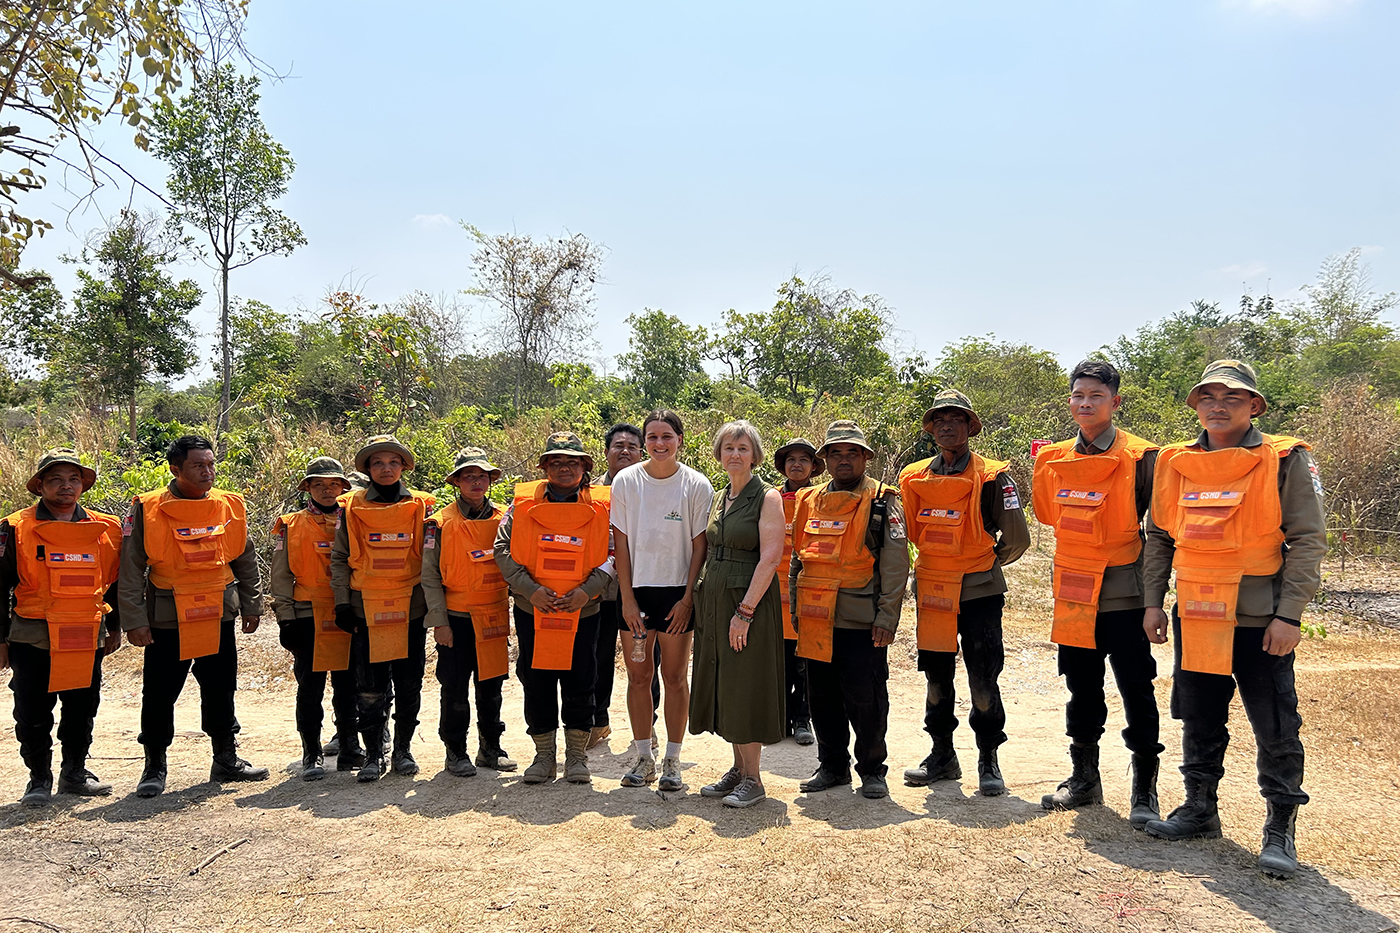 student co-op poses with Cambodian community members wearing orange vests